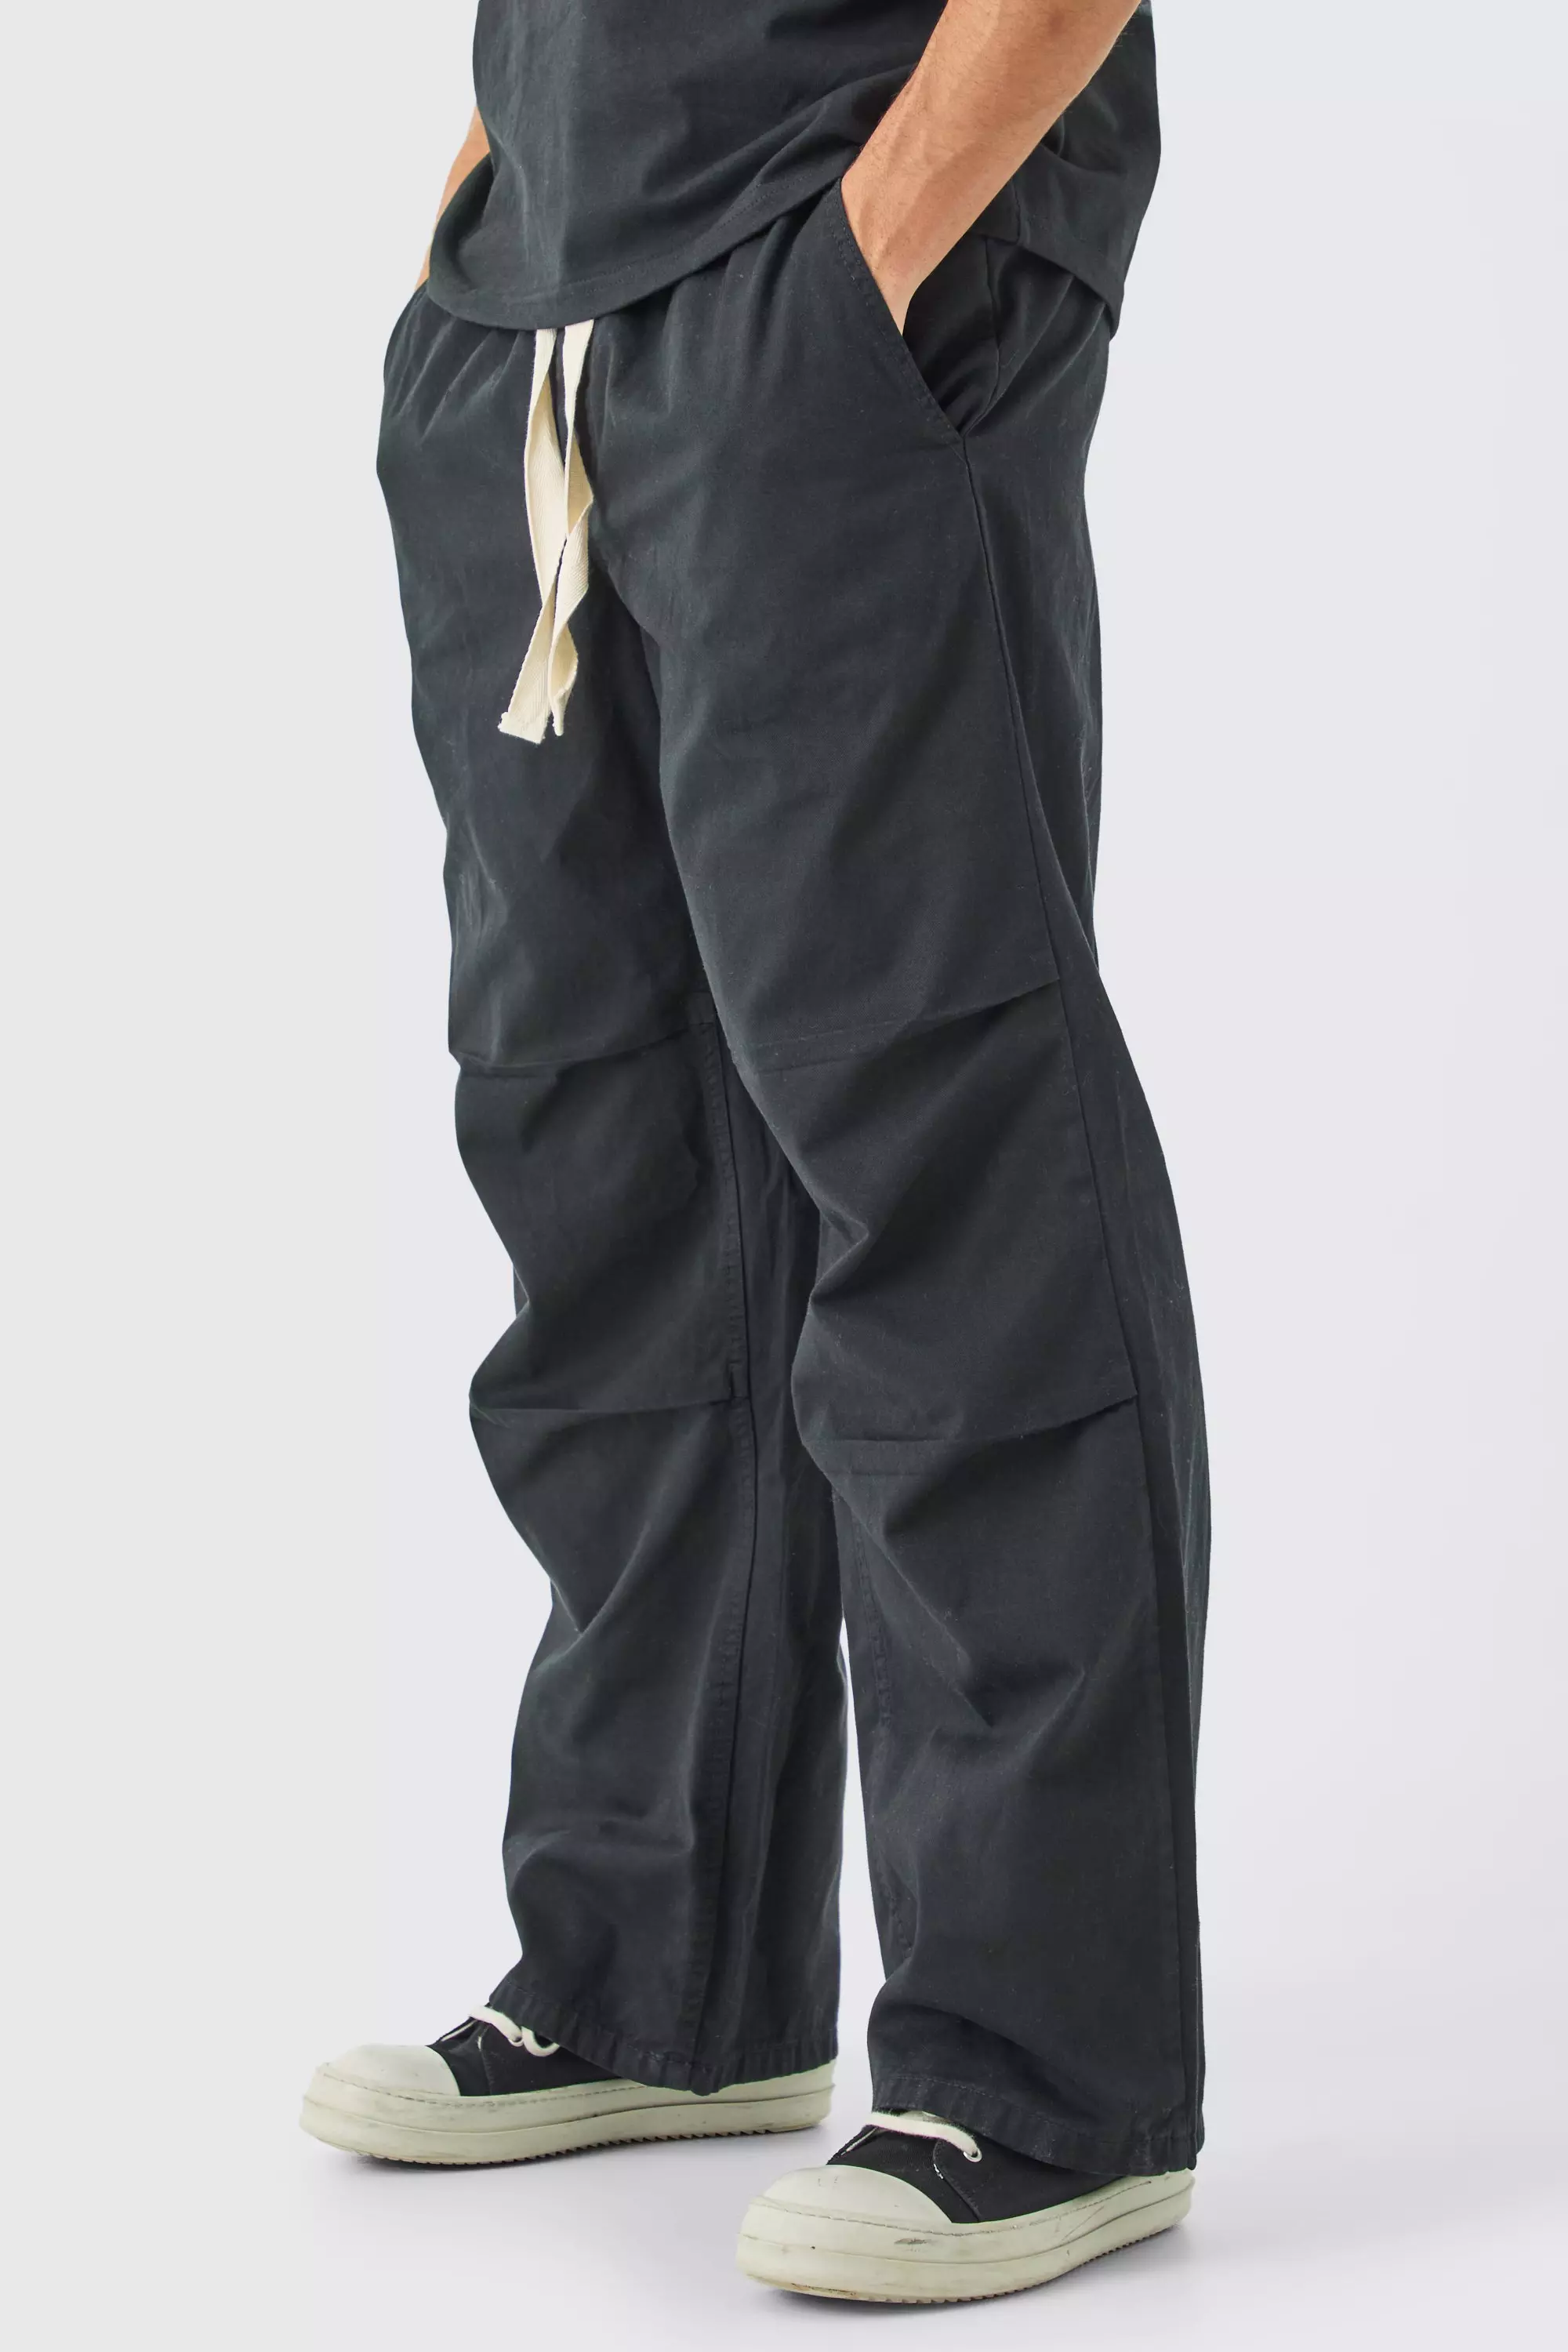 Charcoal Grey Elastic Waist Contrast Drawcord Extreme Baggy Trouser